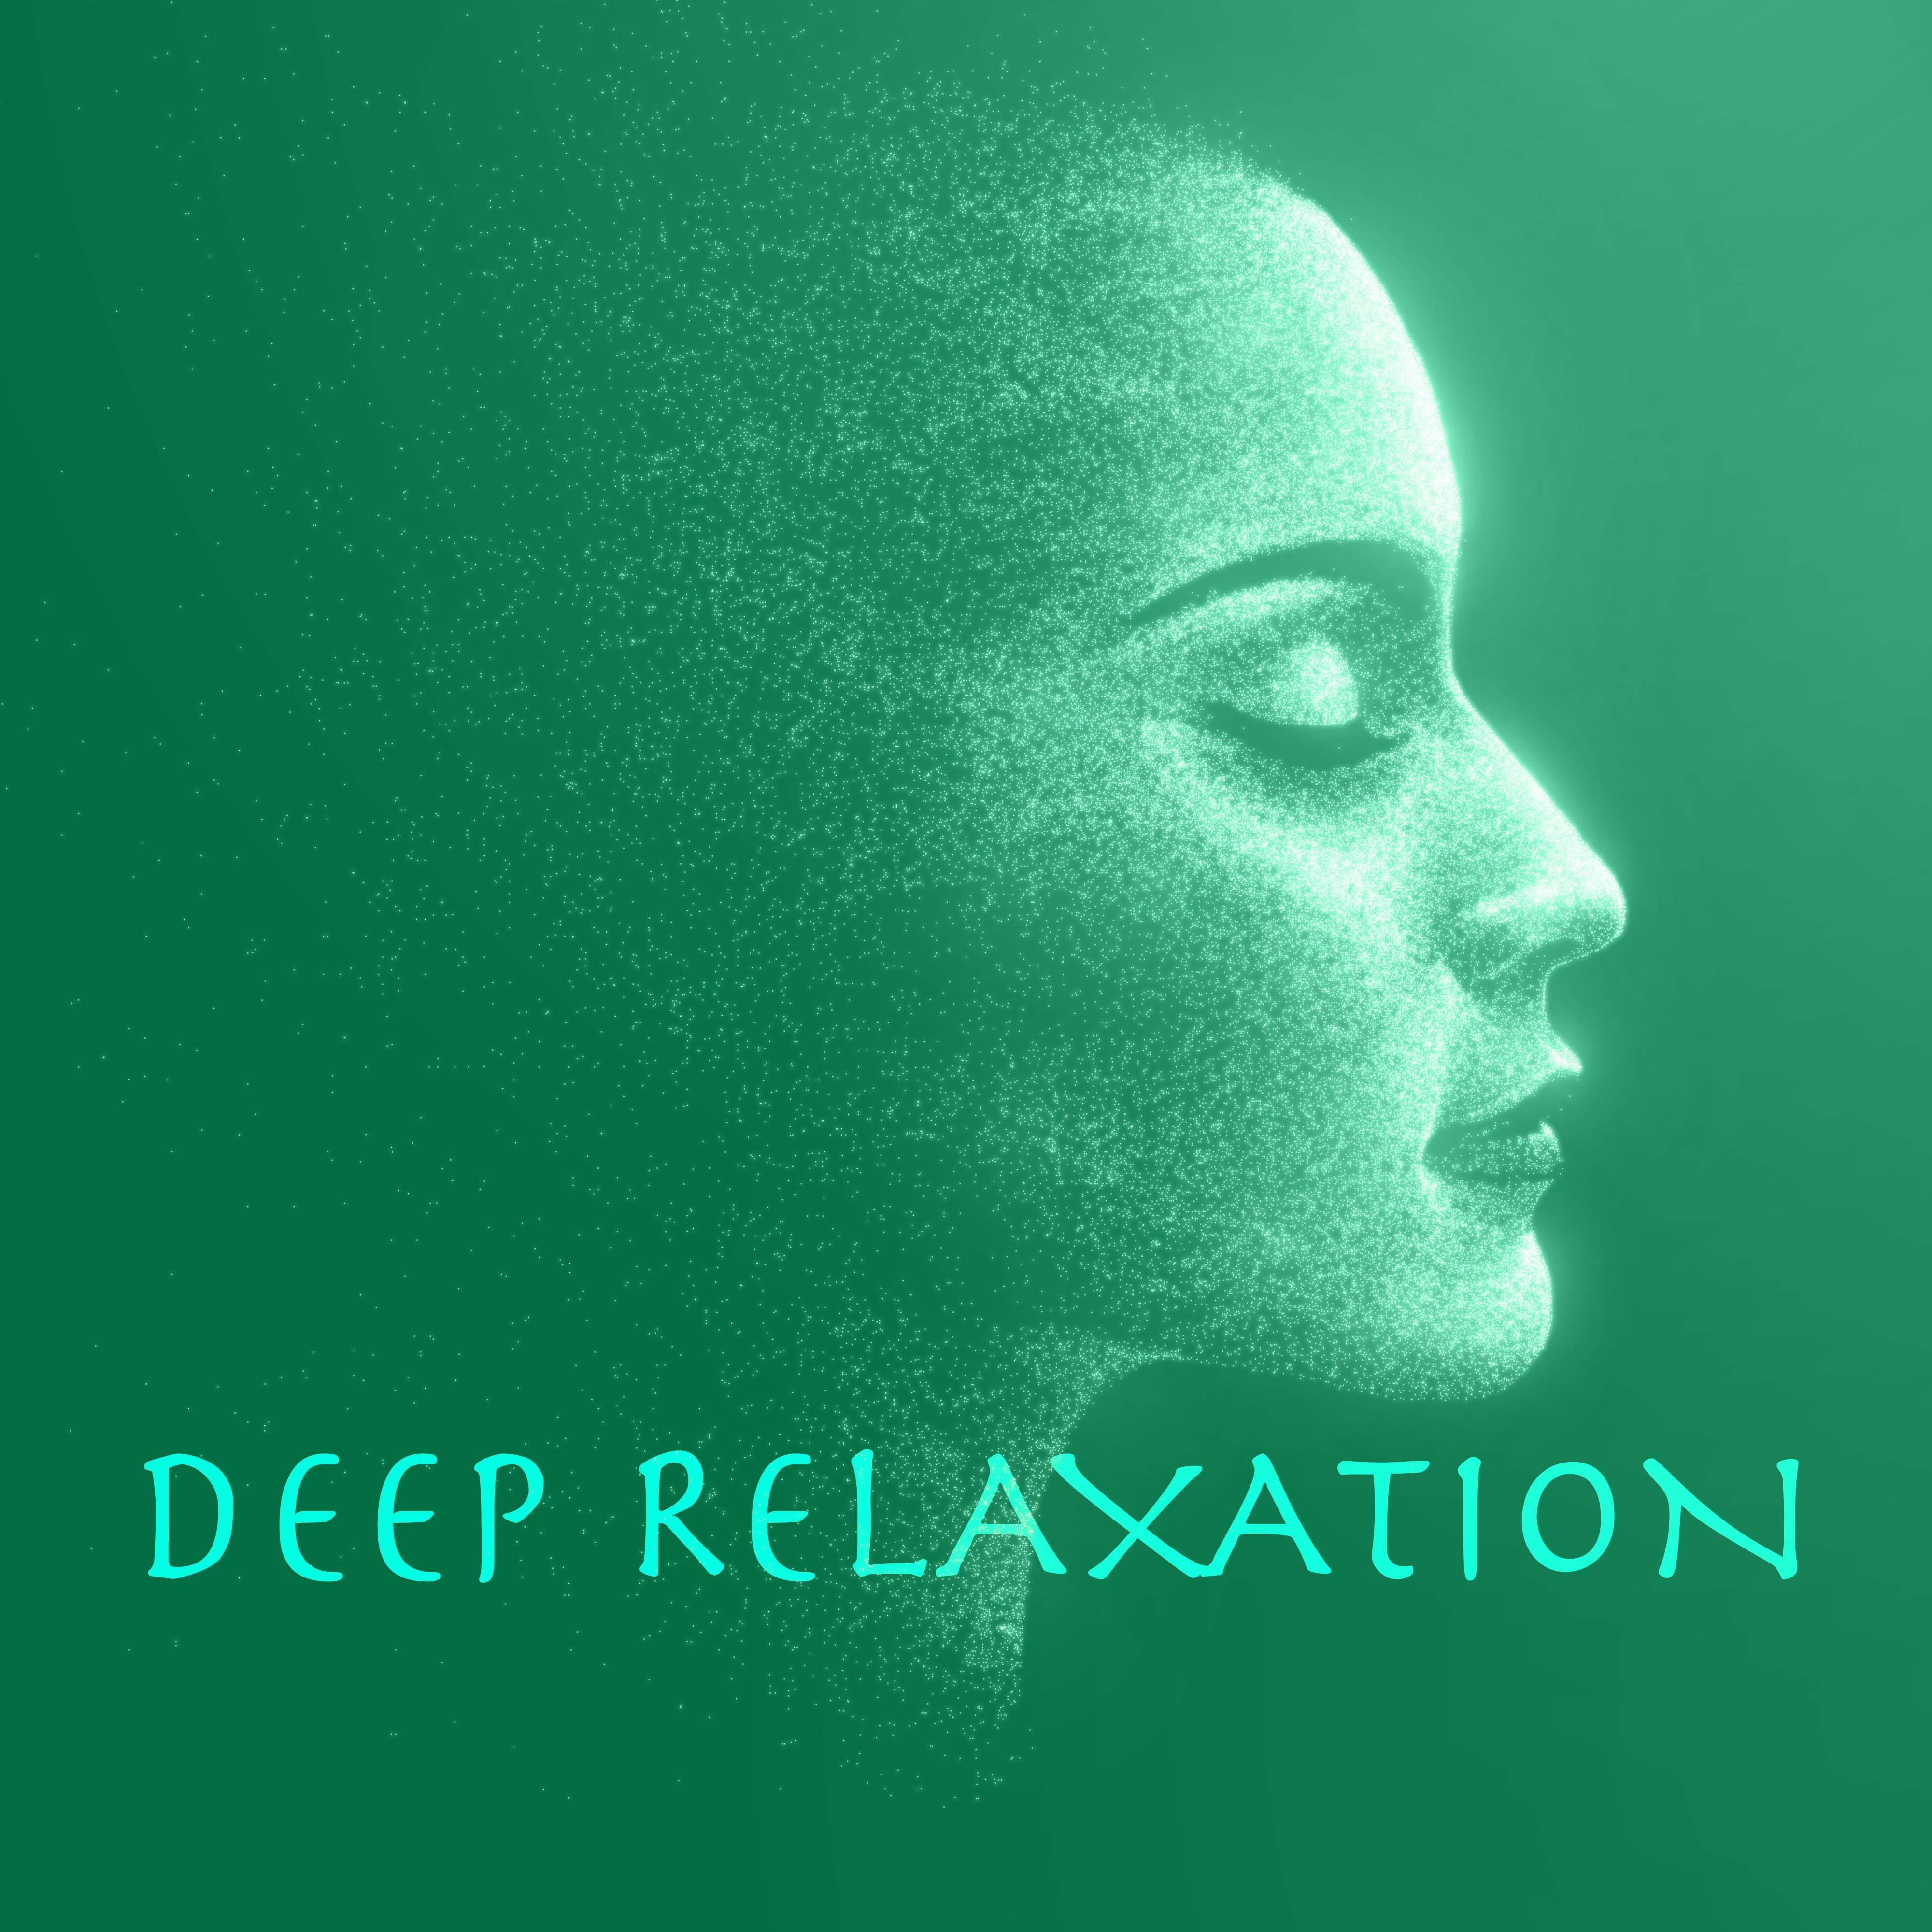 Deep Relaxation Sounds - Naturescapes